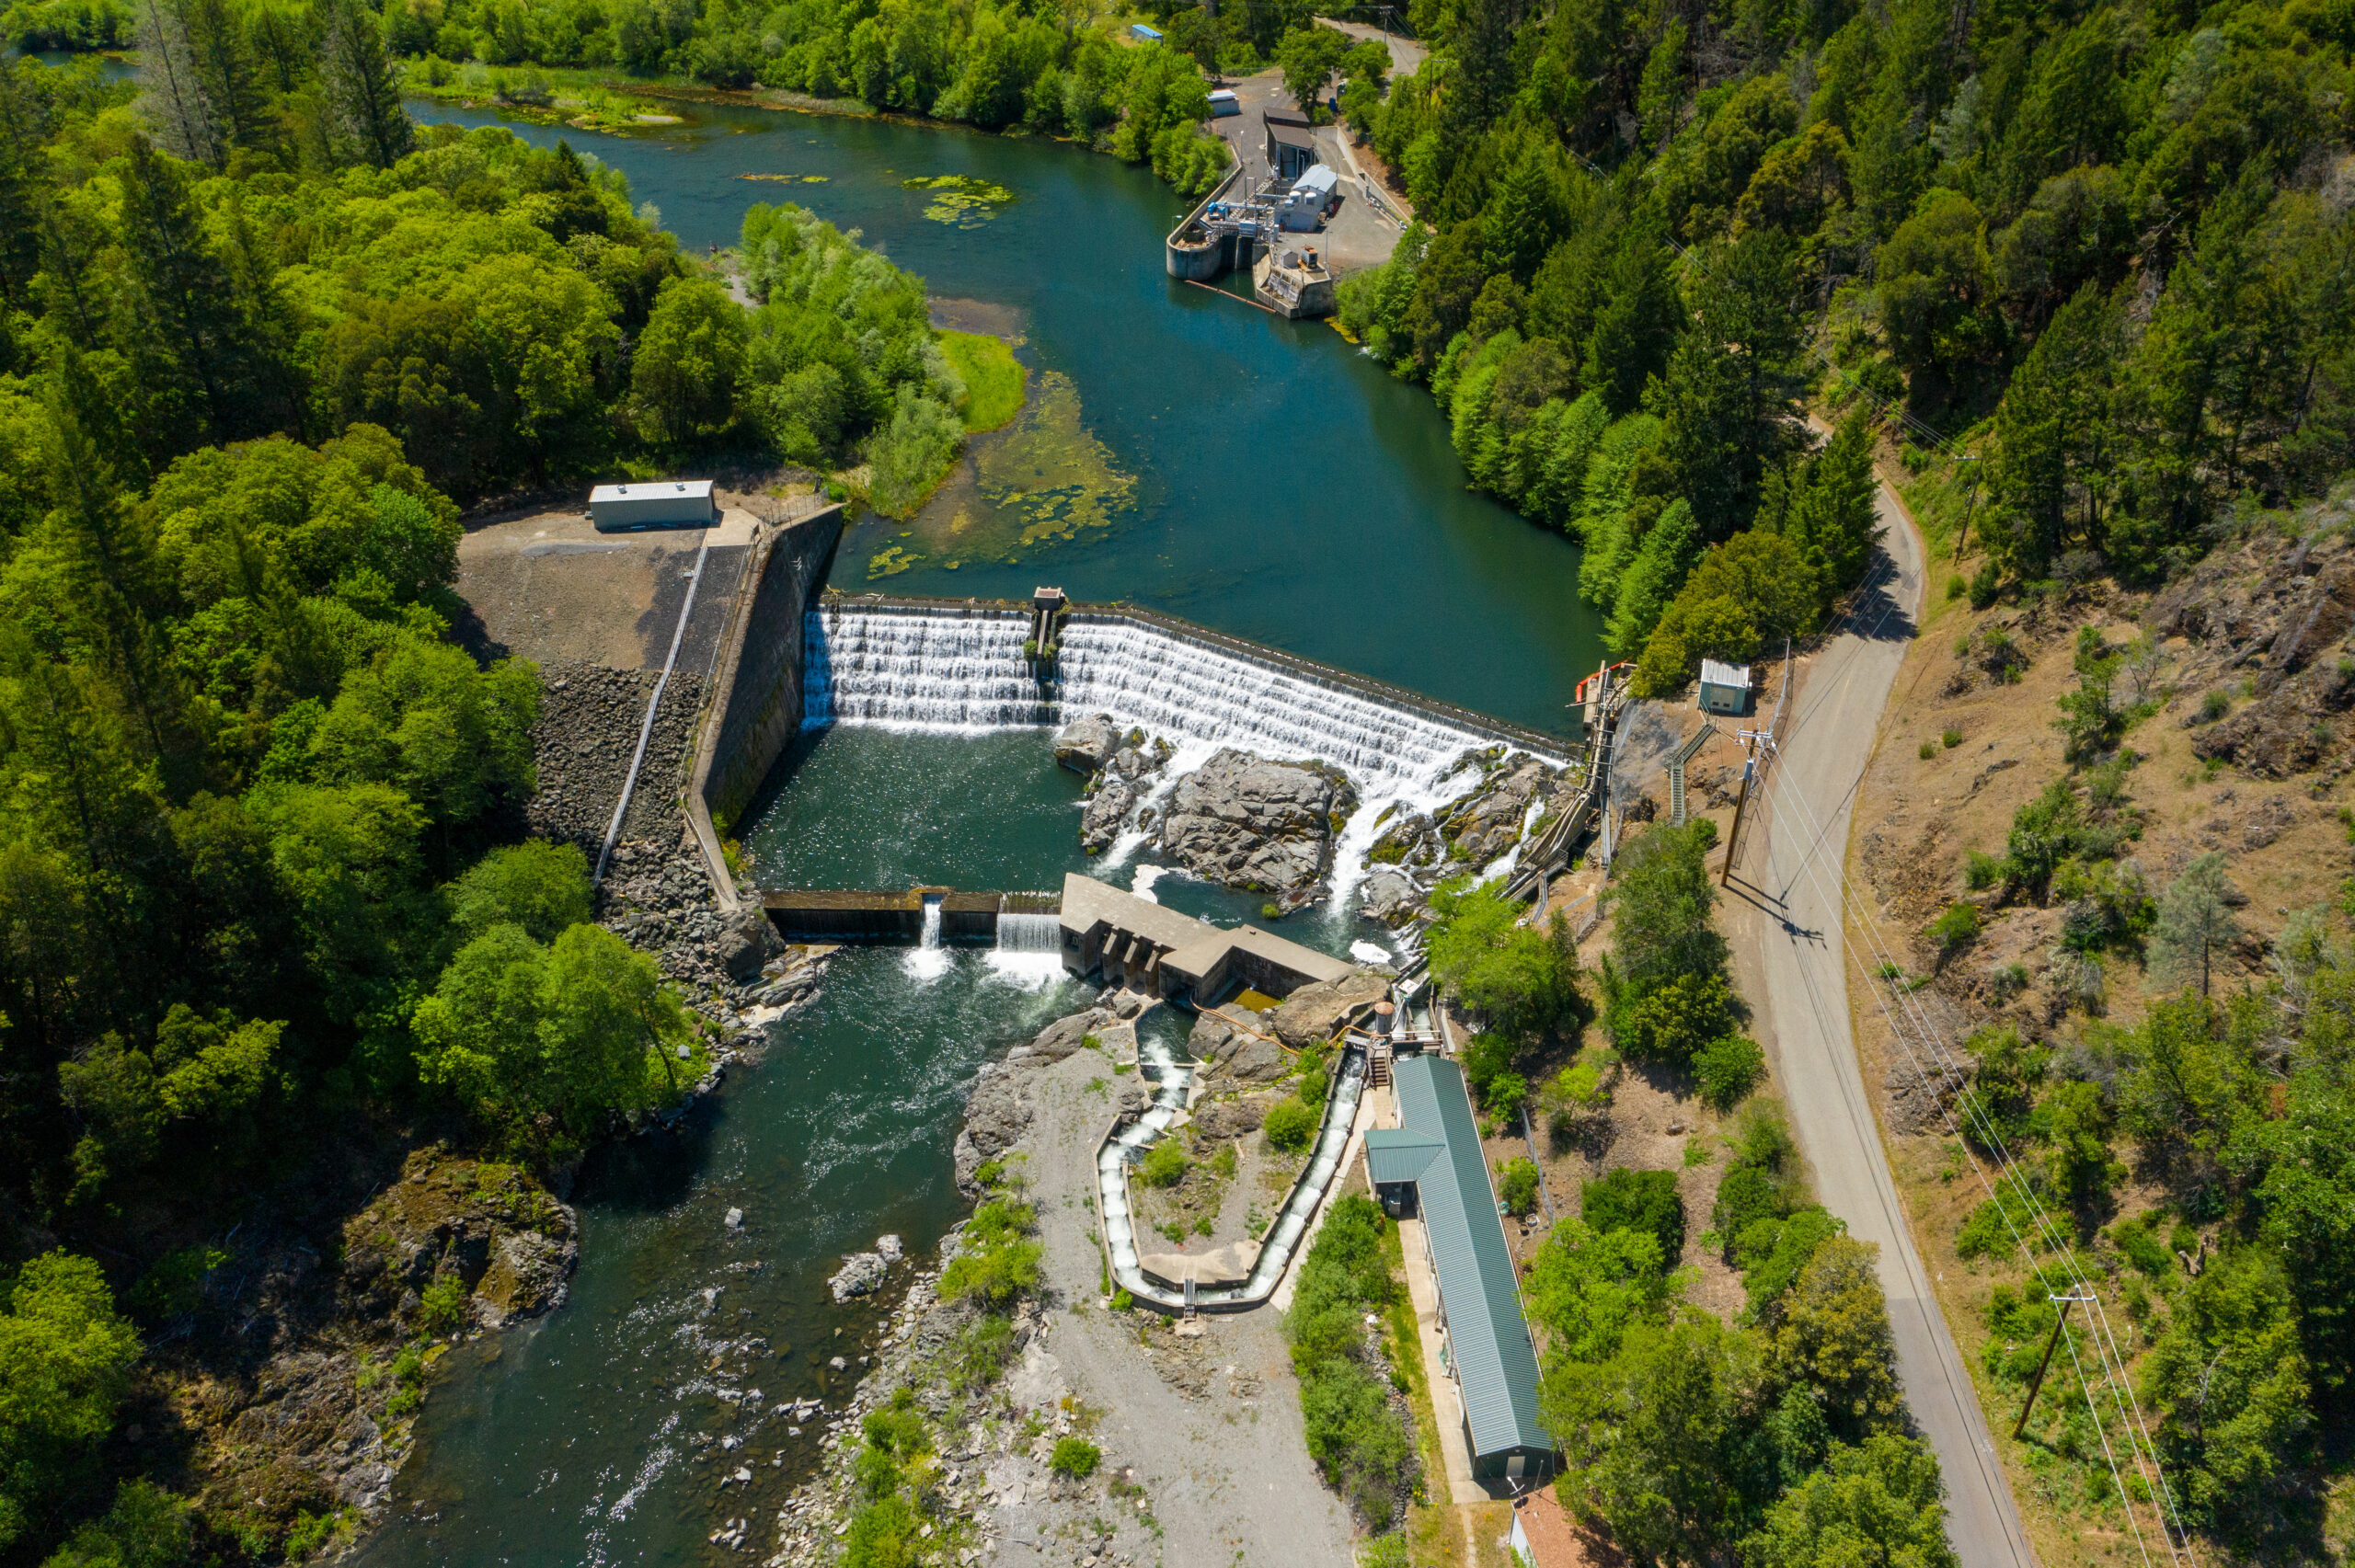 Fishing and Conservation Groups Sue PG&E over Harms to Salmon and Steelhead on Eel River